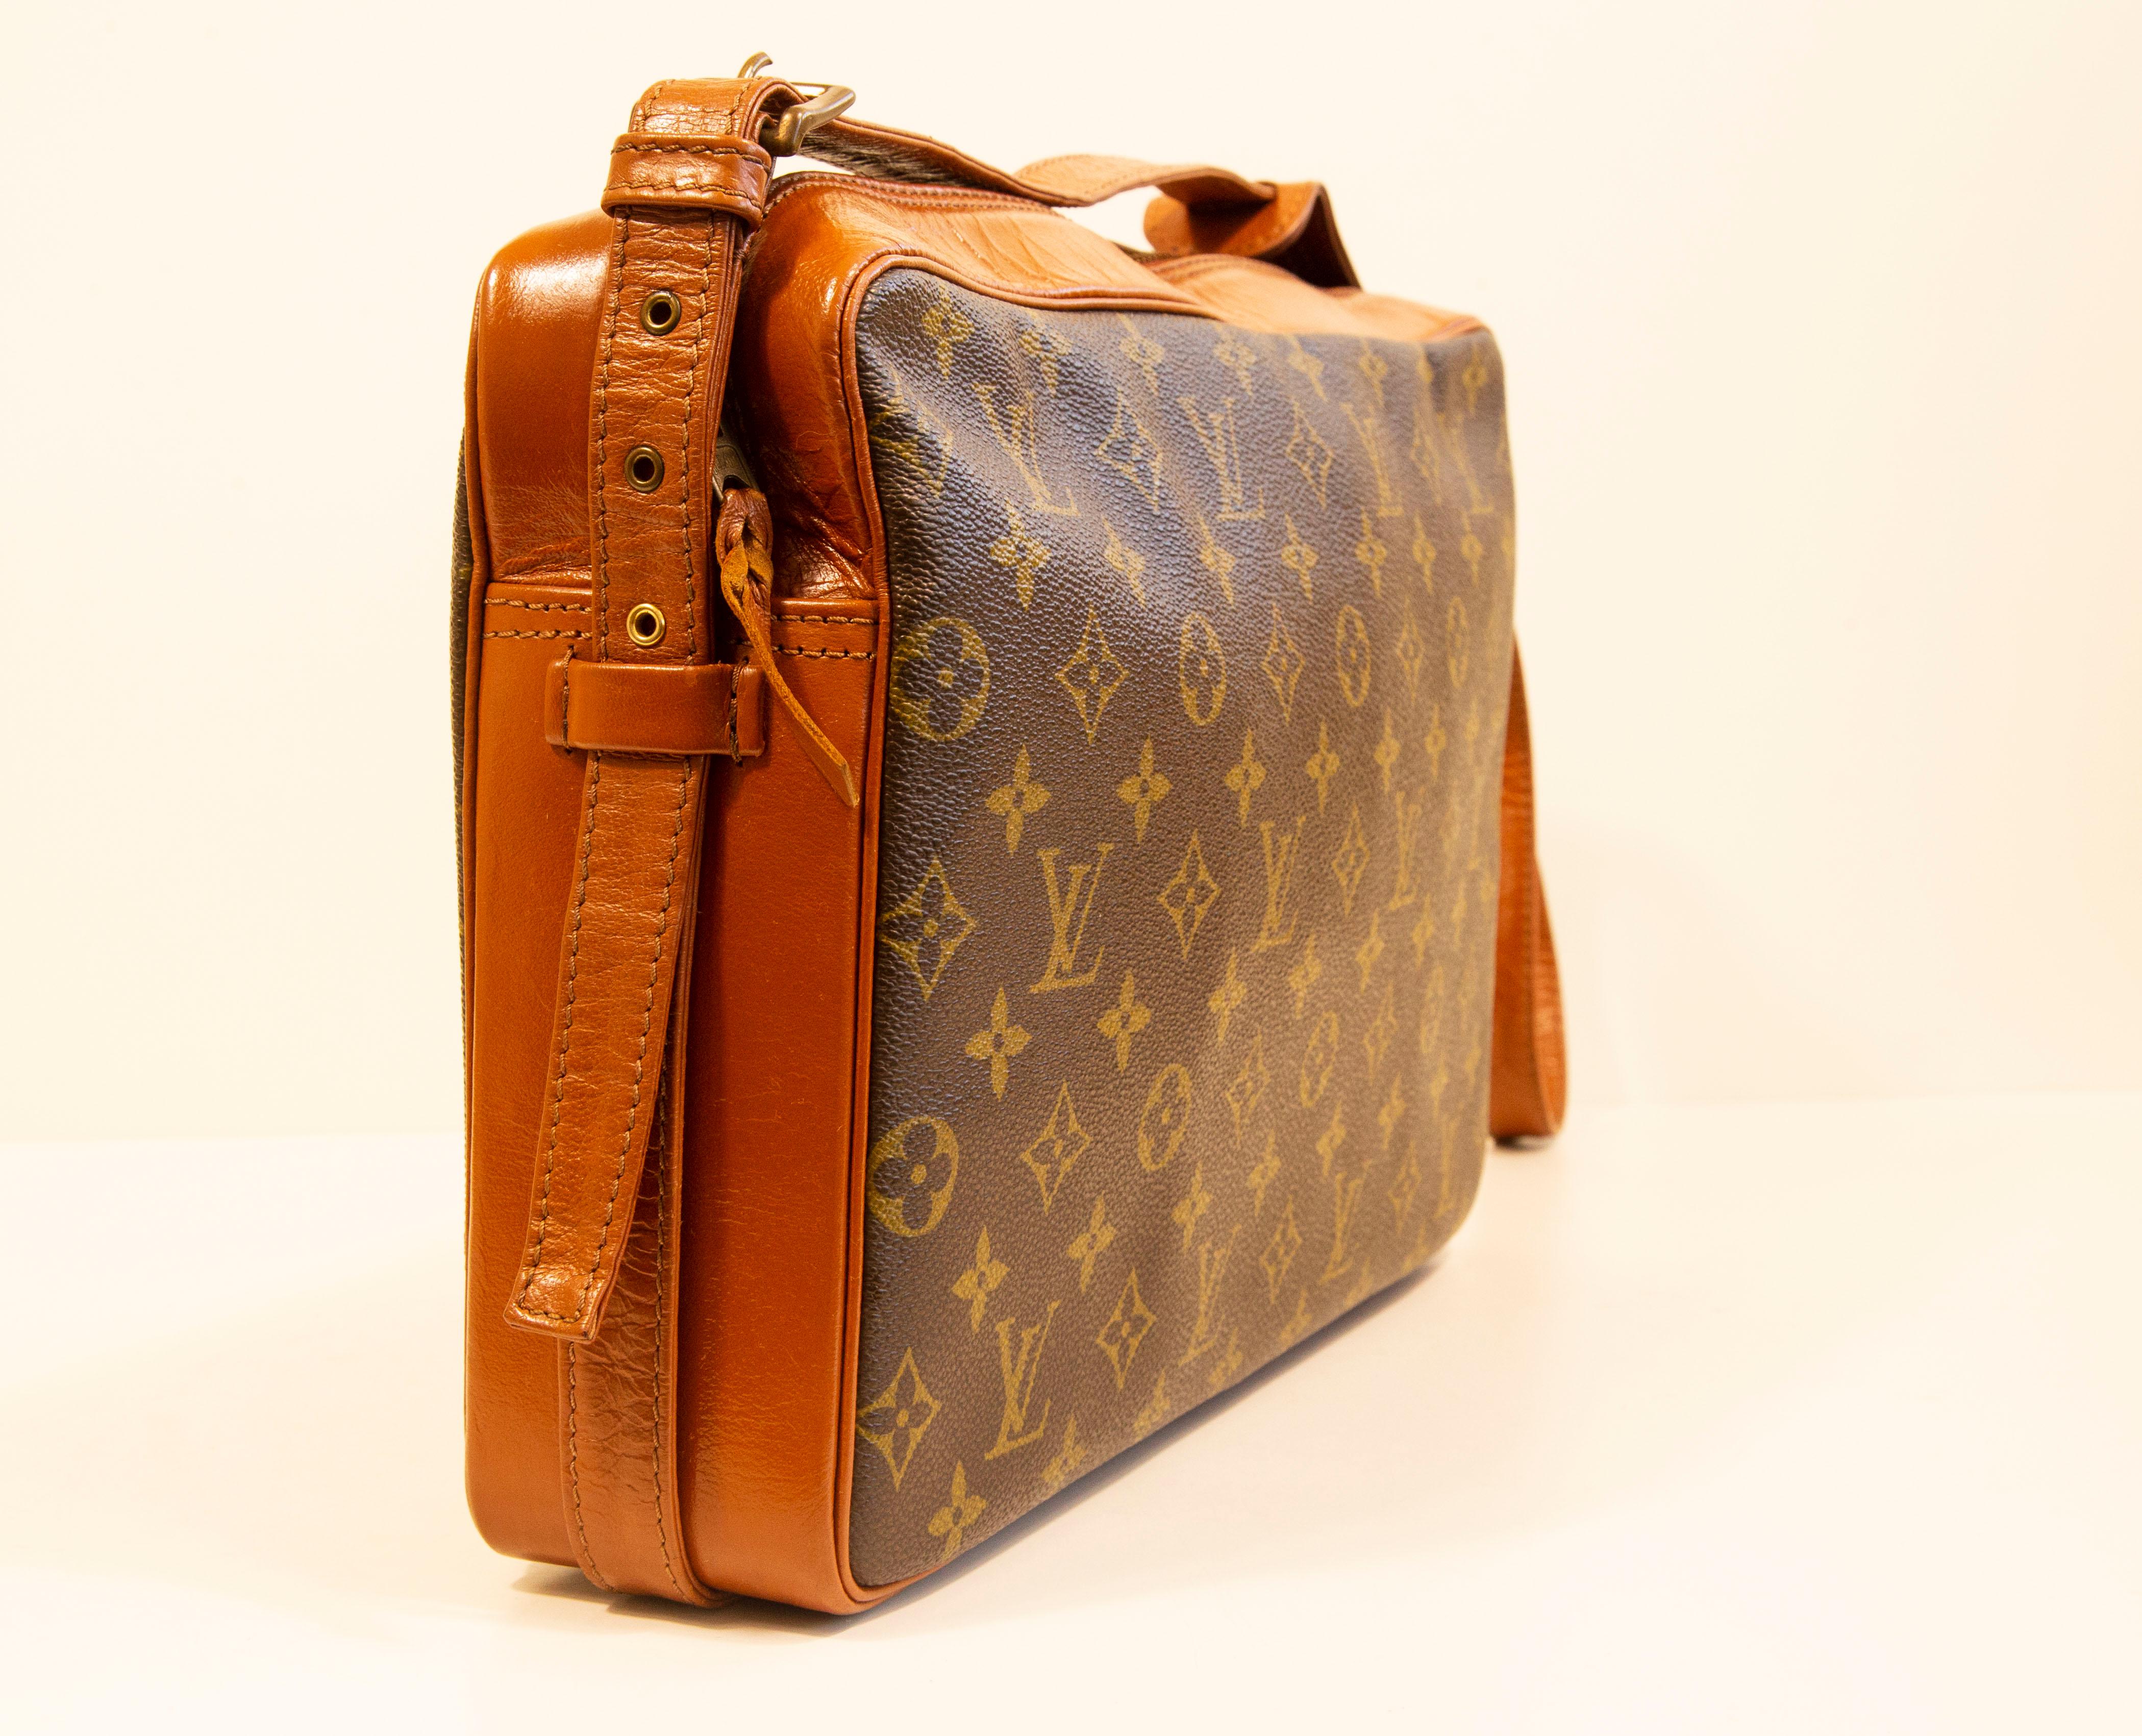 A vintage Louis Vuitton Monogram Canvas Tuileries messenger bag. The bag is made of coated canvas and leather. The interior is fully lined in leather. The interior consists of one major compartment and three side pockets of which one has a zipper.